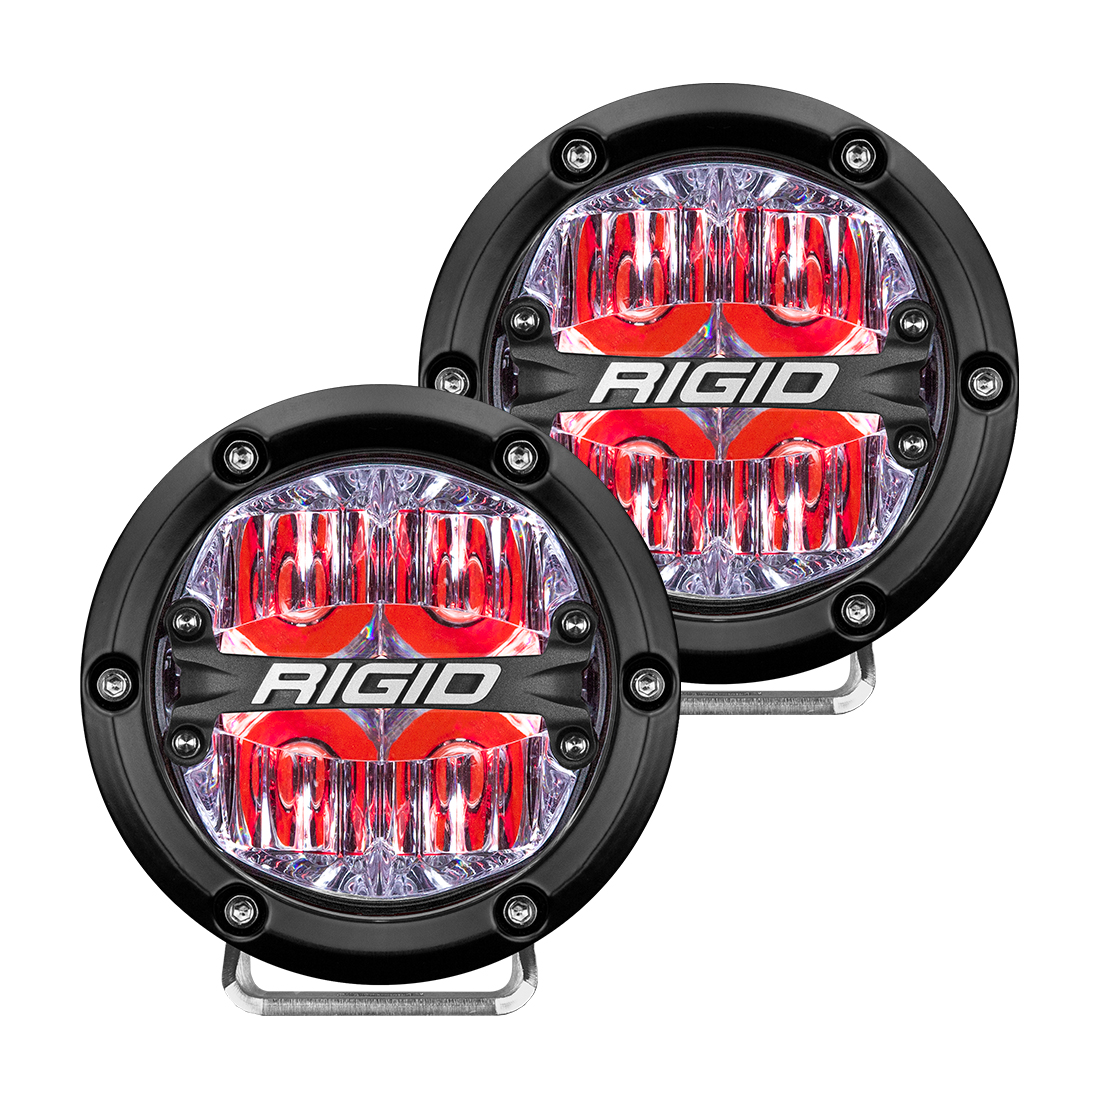 Rigid Industries 360-Series 4 Inch Led Off-Road Drive Beam Red Backlight Pair - Click Image to Close